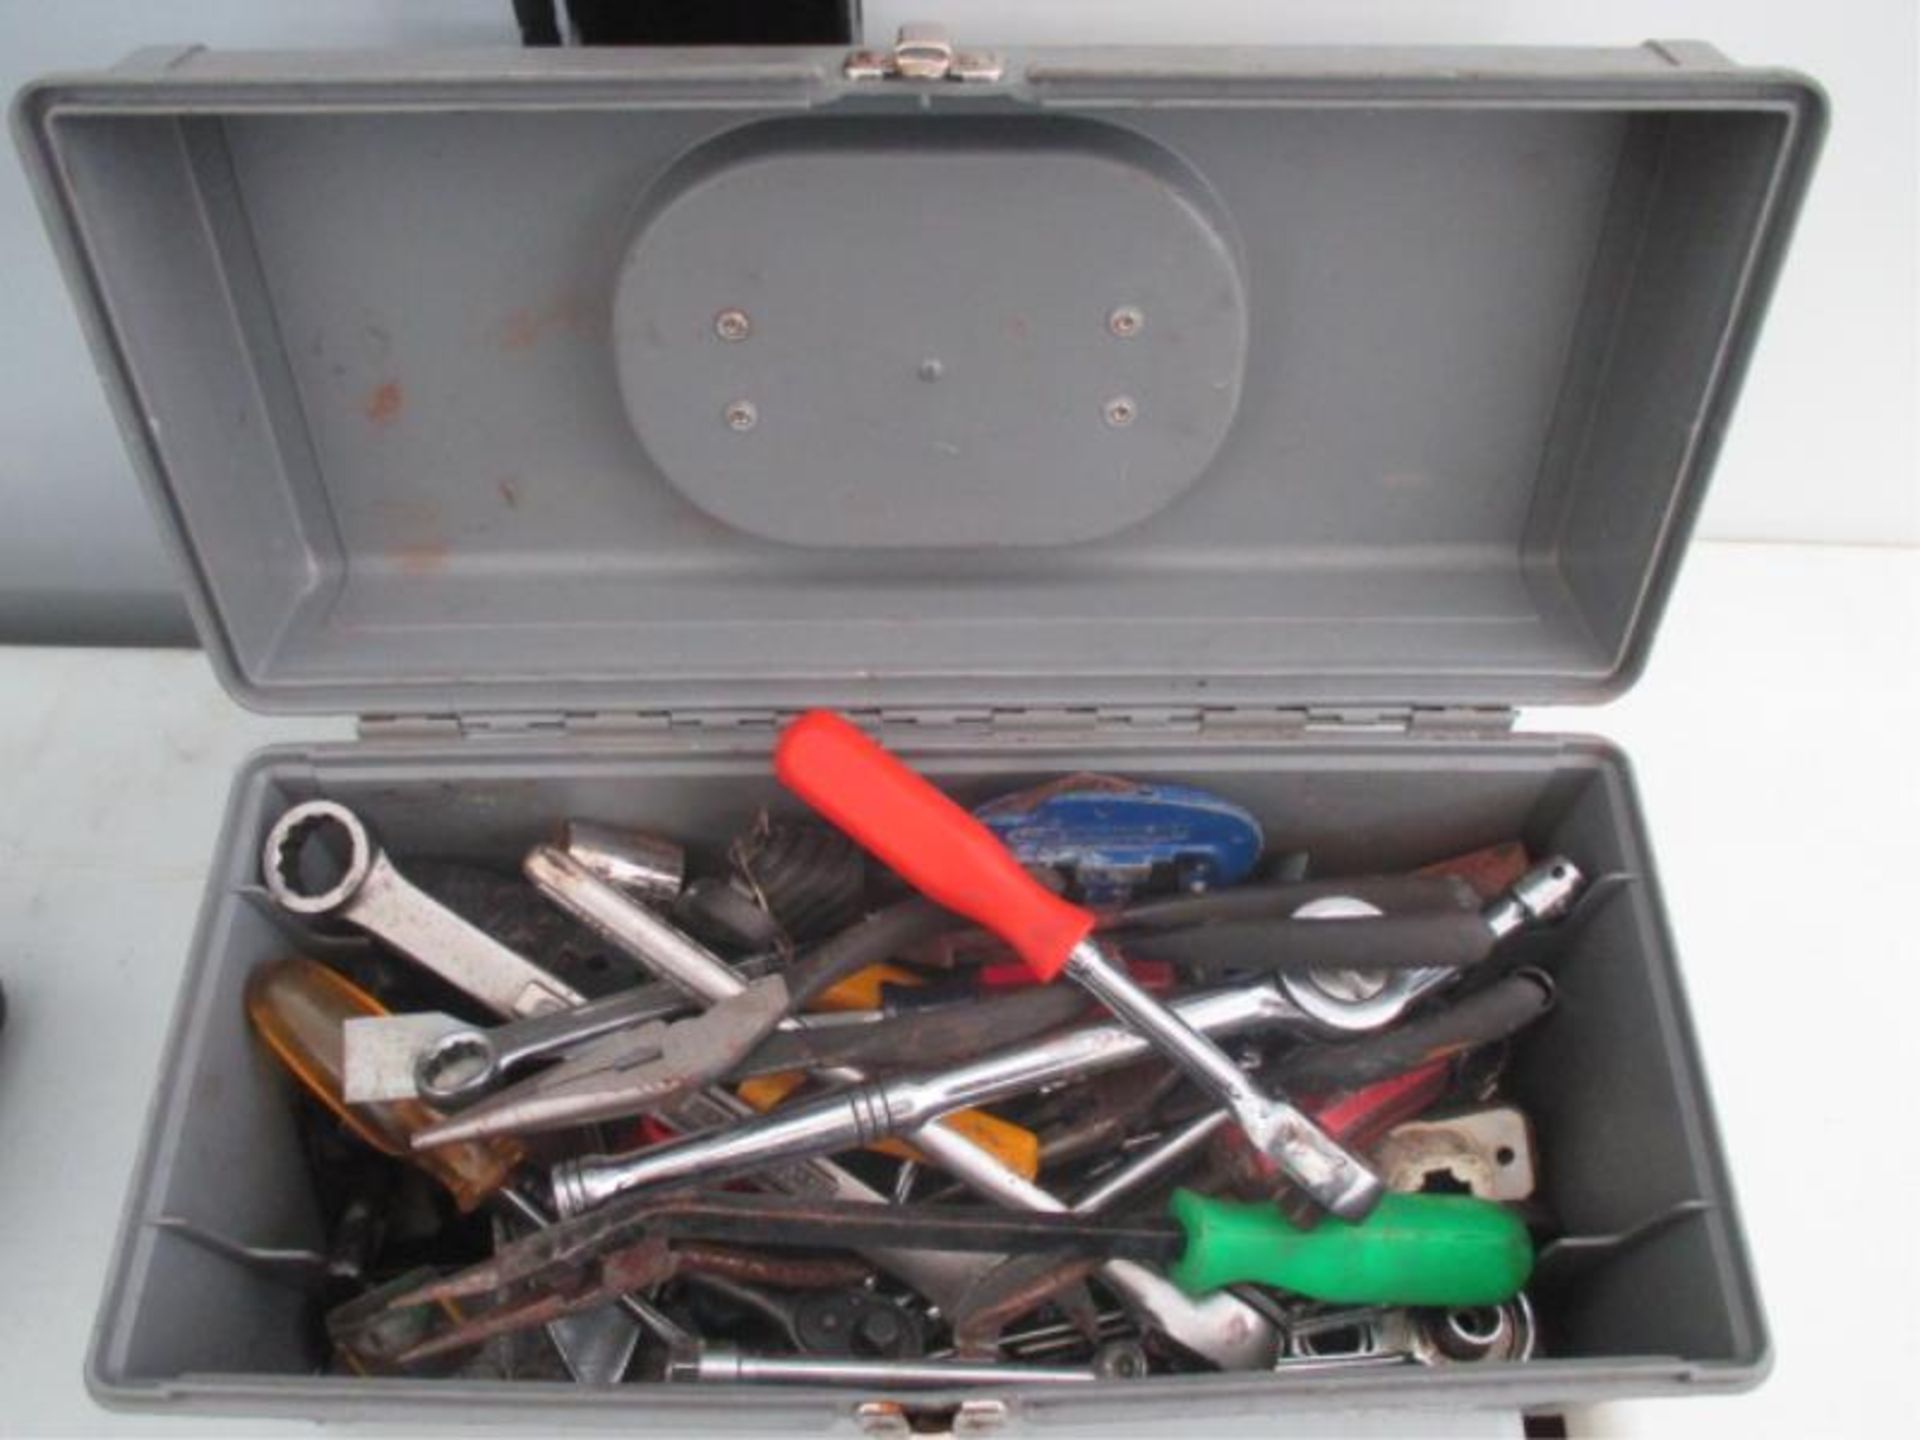 Craftsman Grey Plastic Tool Box w/ Assorted Tools Including: Pliers, Ratchet, Sockets, Strippers,